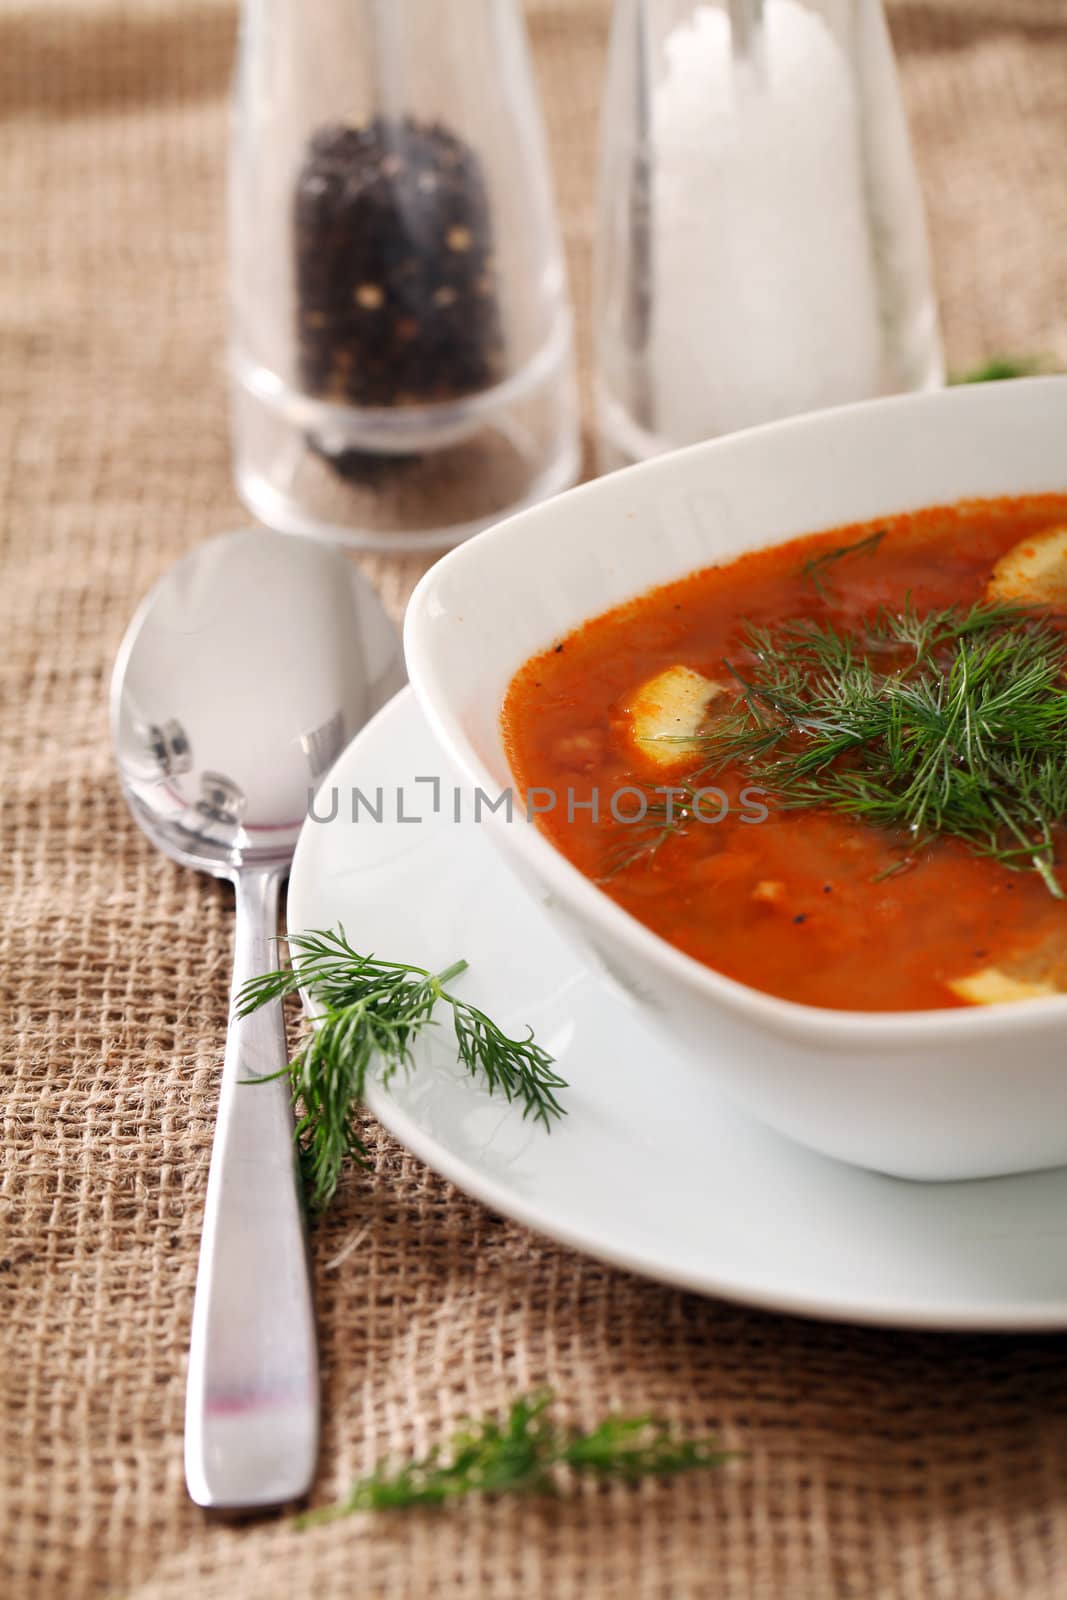 Image of bowl of hot red soup served with the salt, pepper and spoon on a beige tablecloth